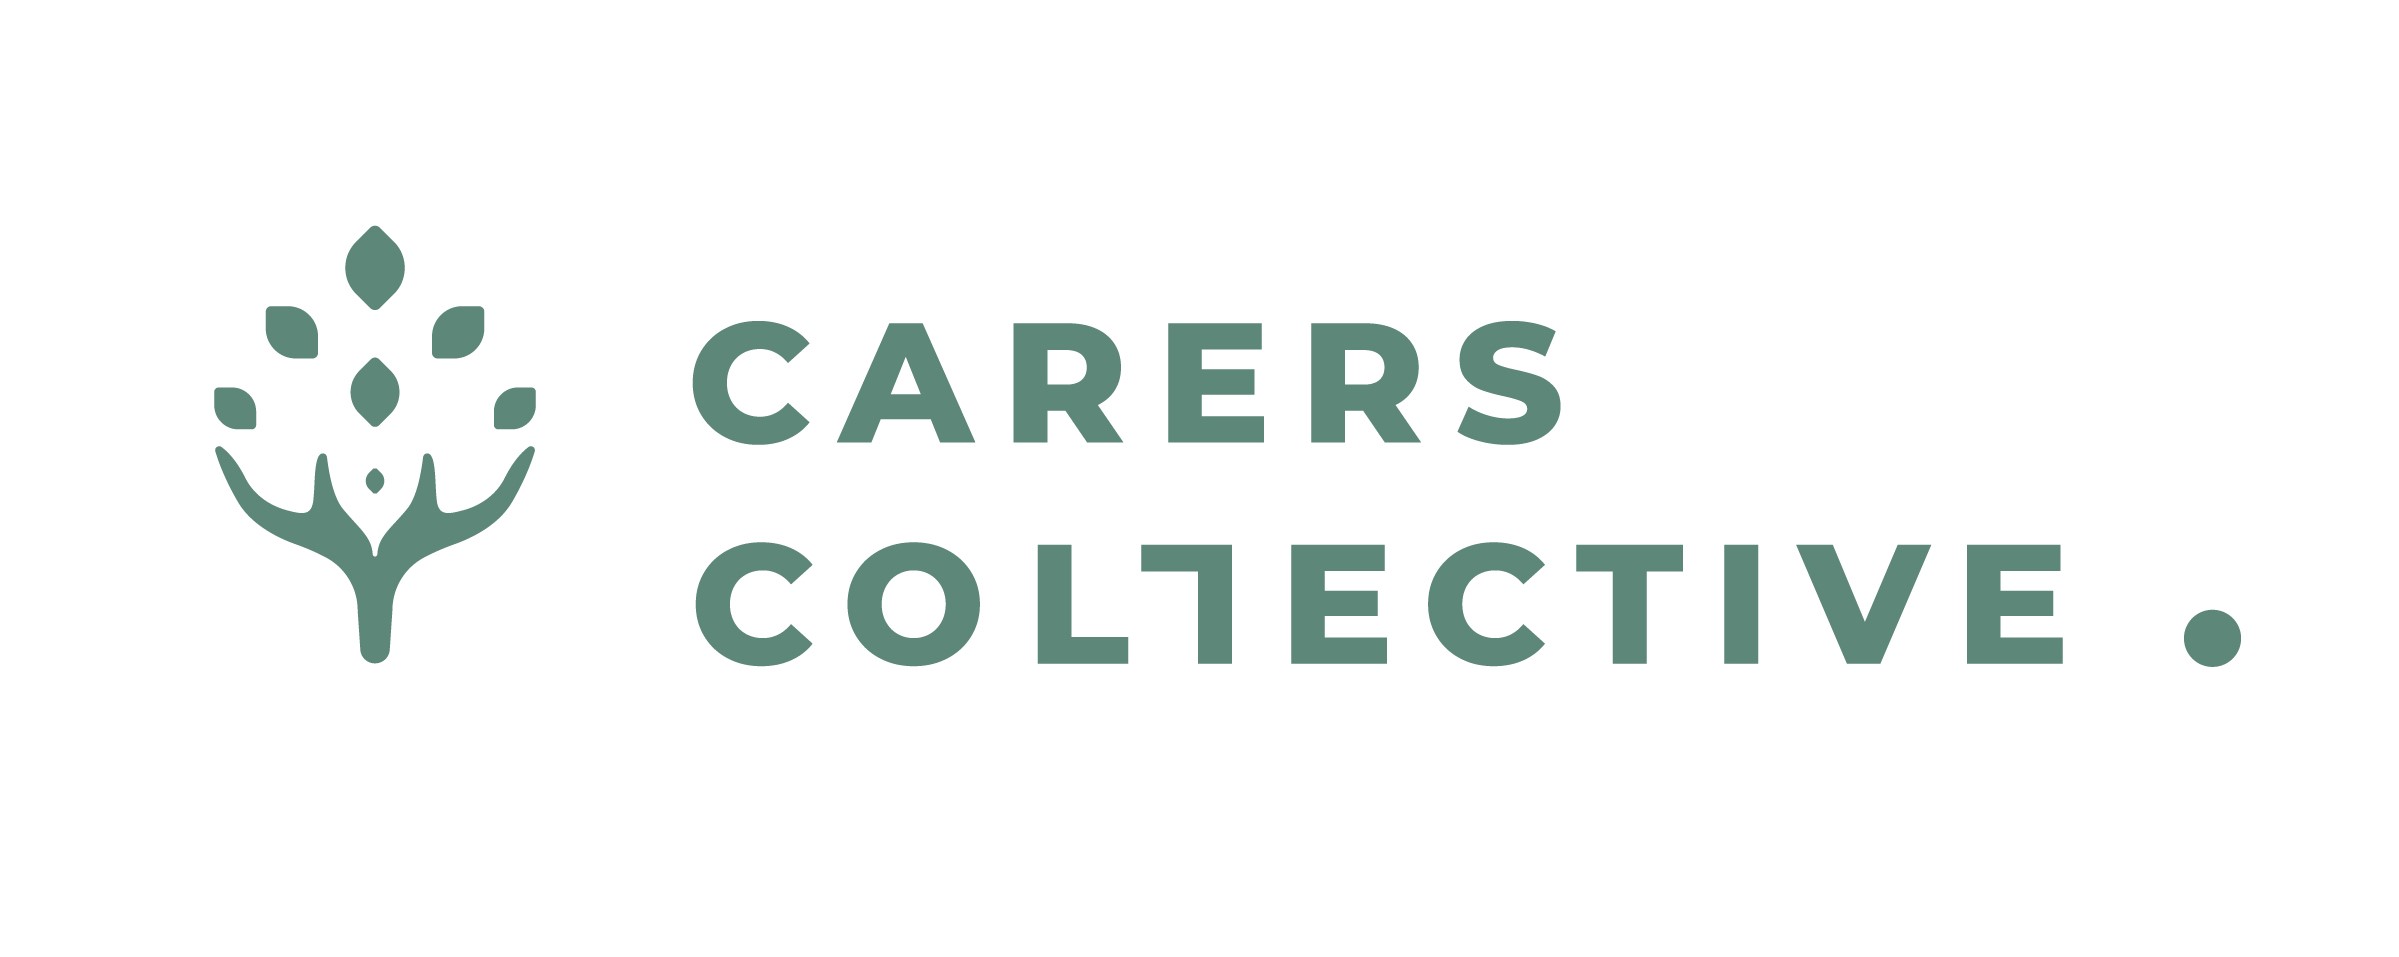 Carers Collective Horizontal Logo White Background.jpg